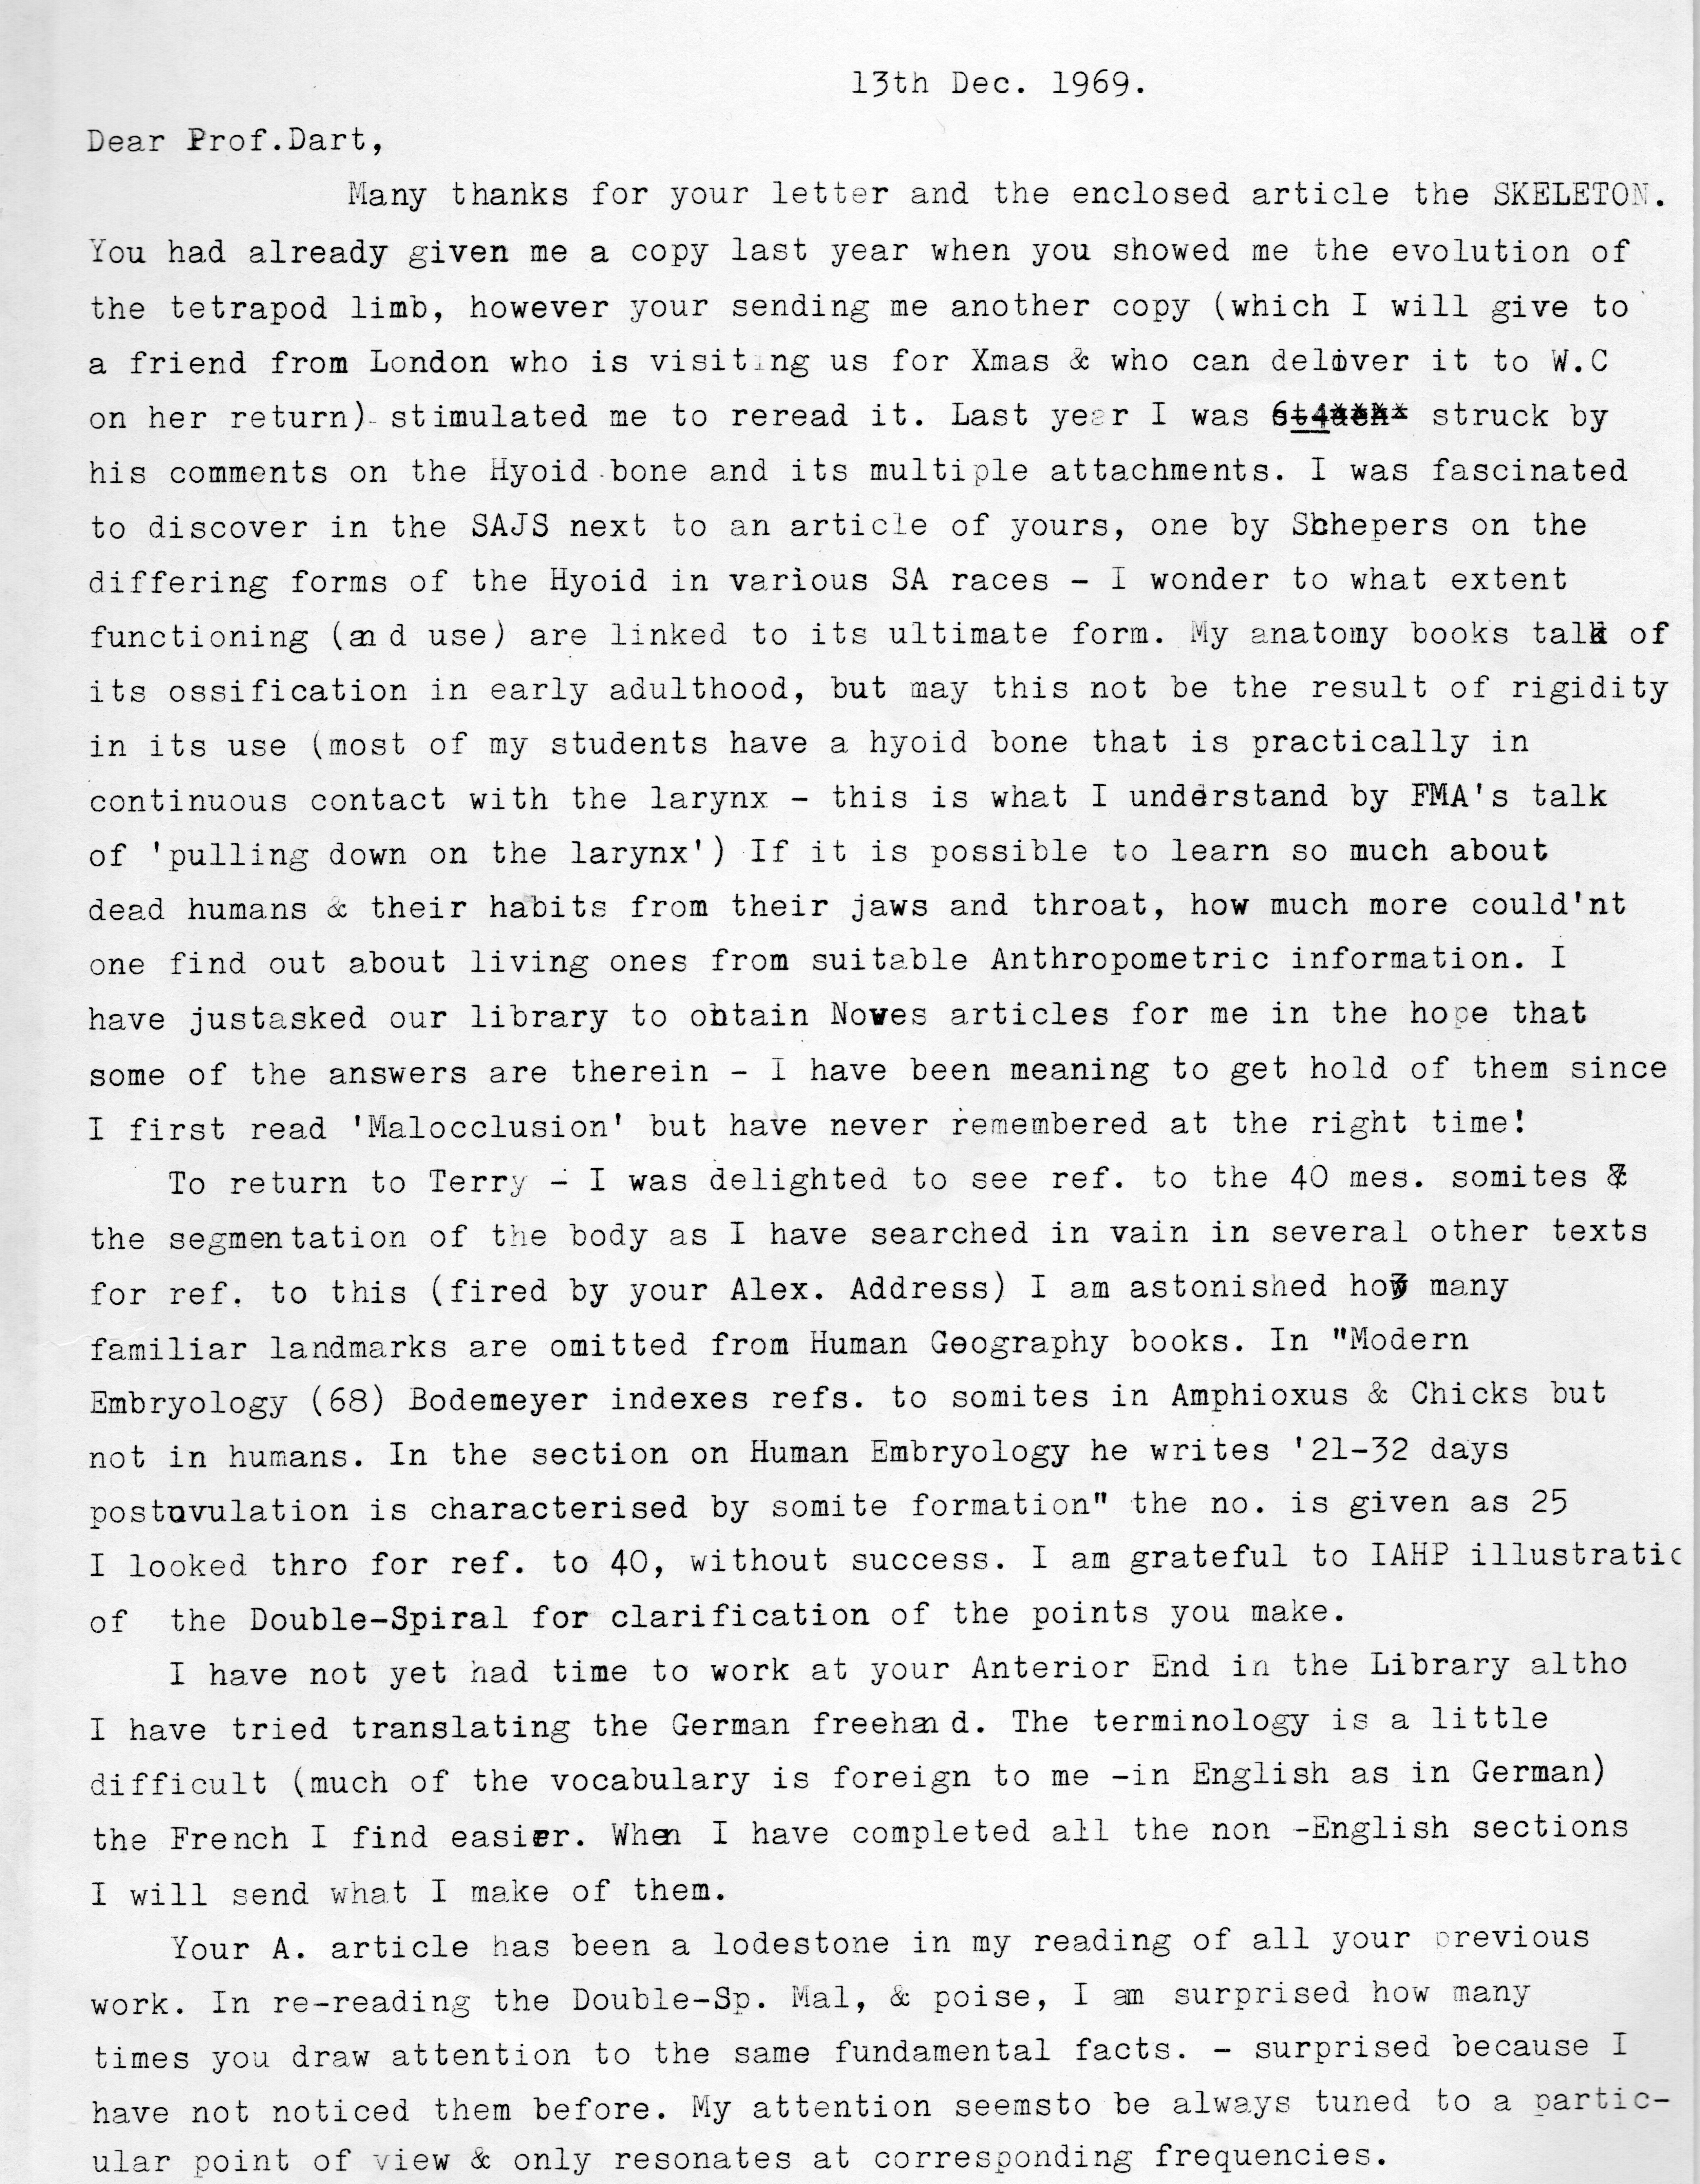 Page 1 of Dart letter to Murray. Dec. 13, 1969.